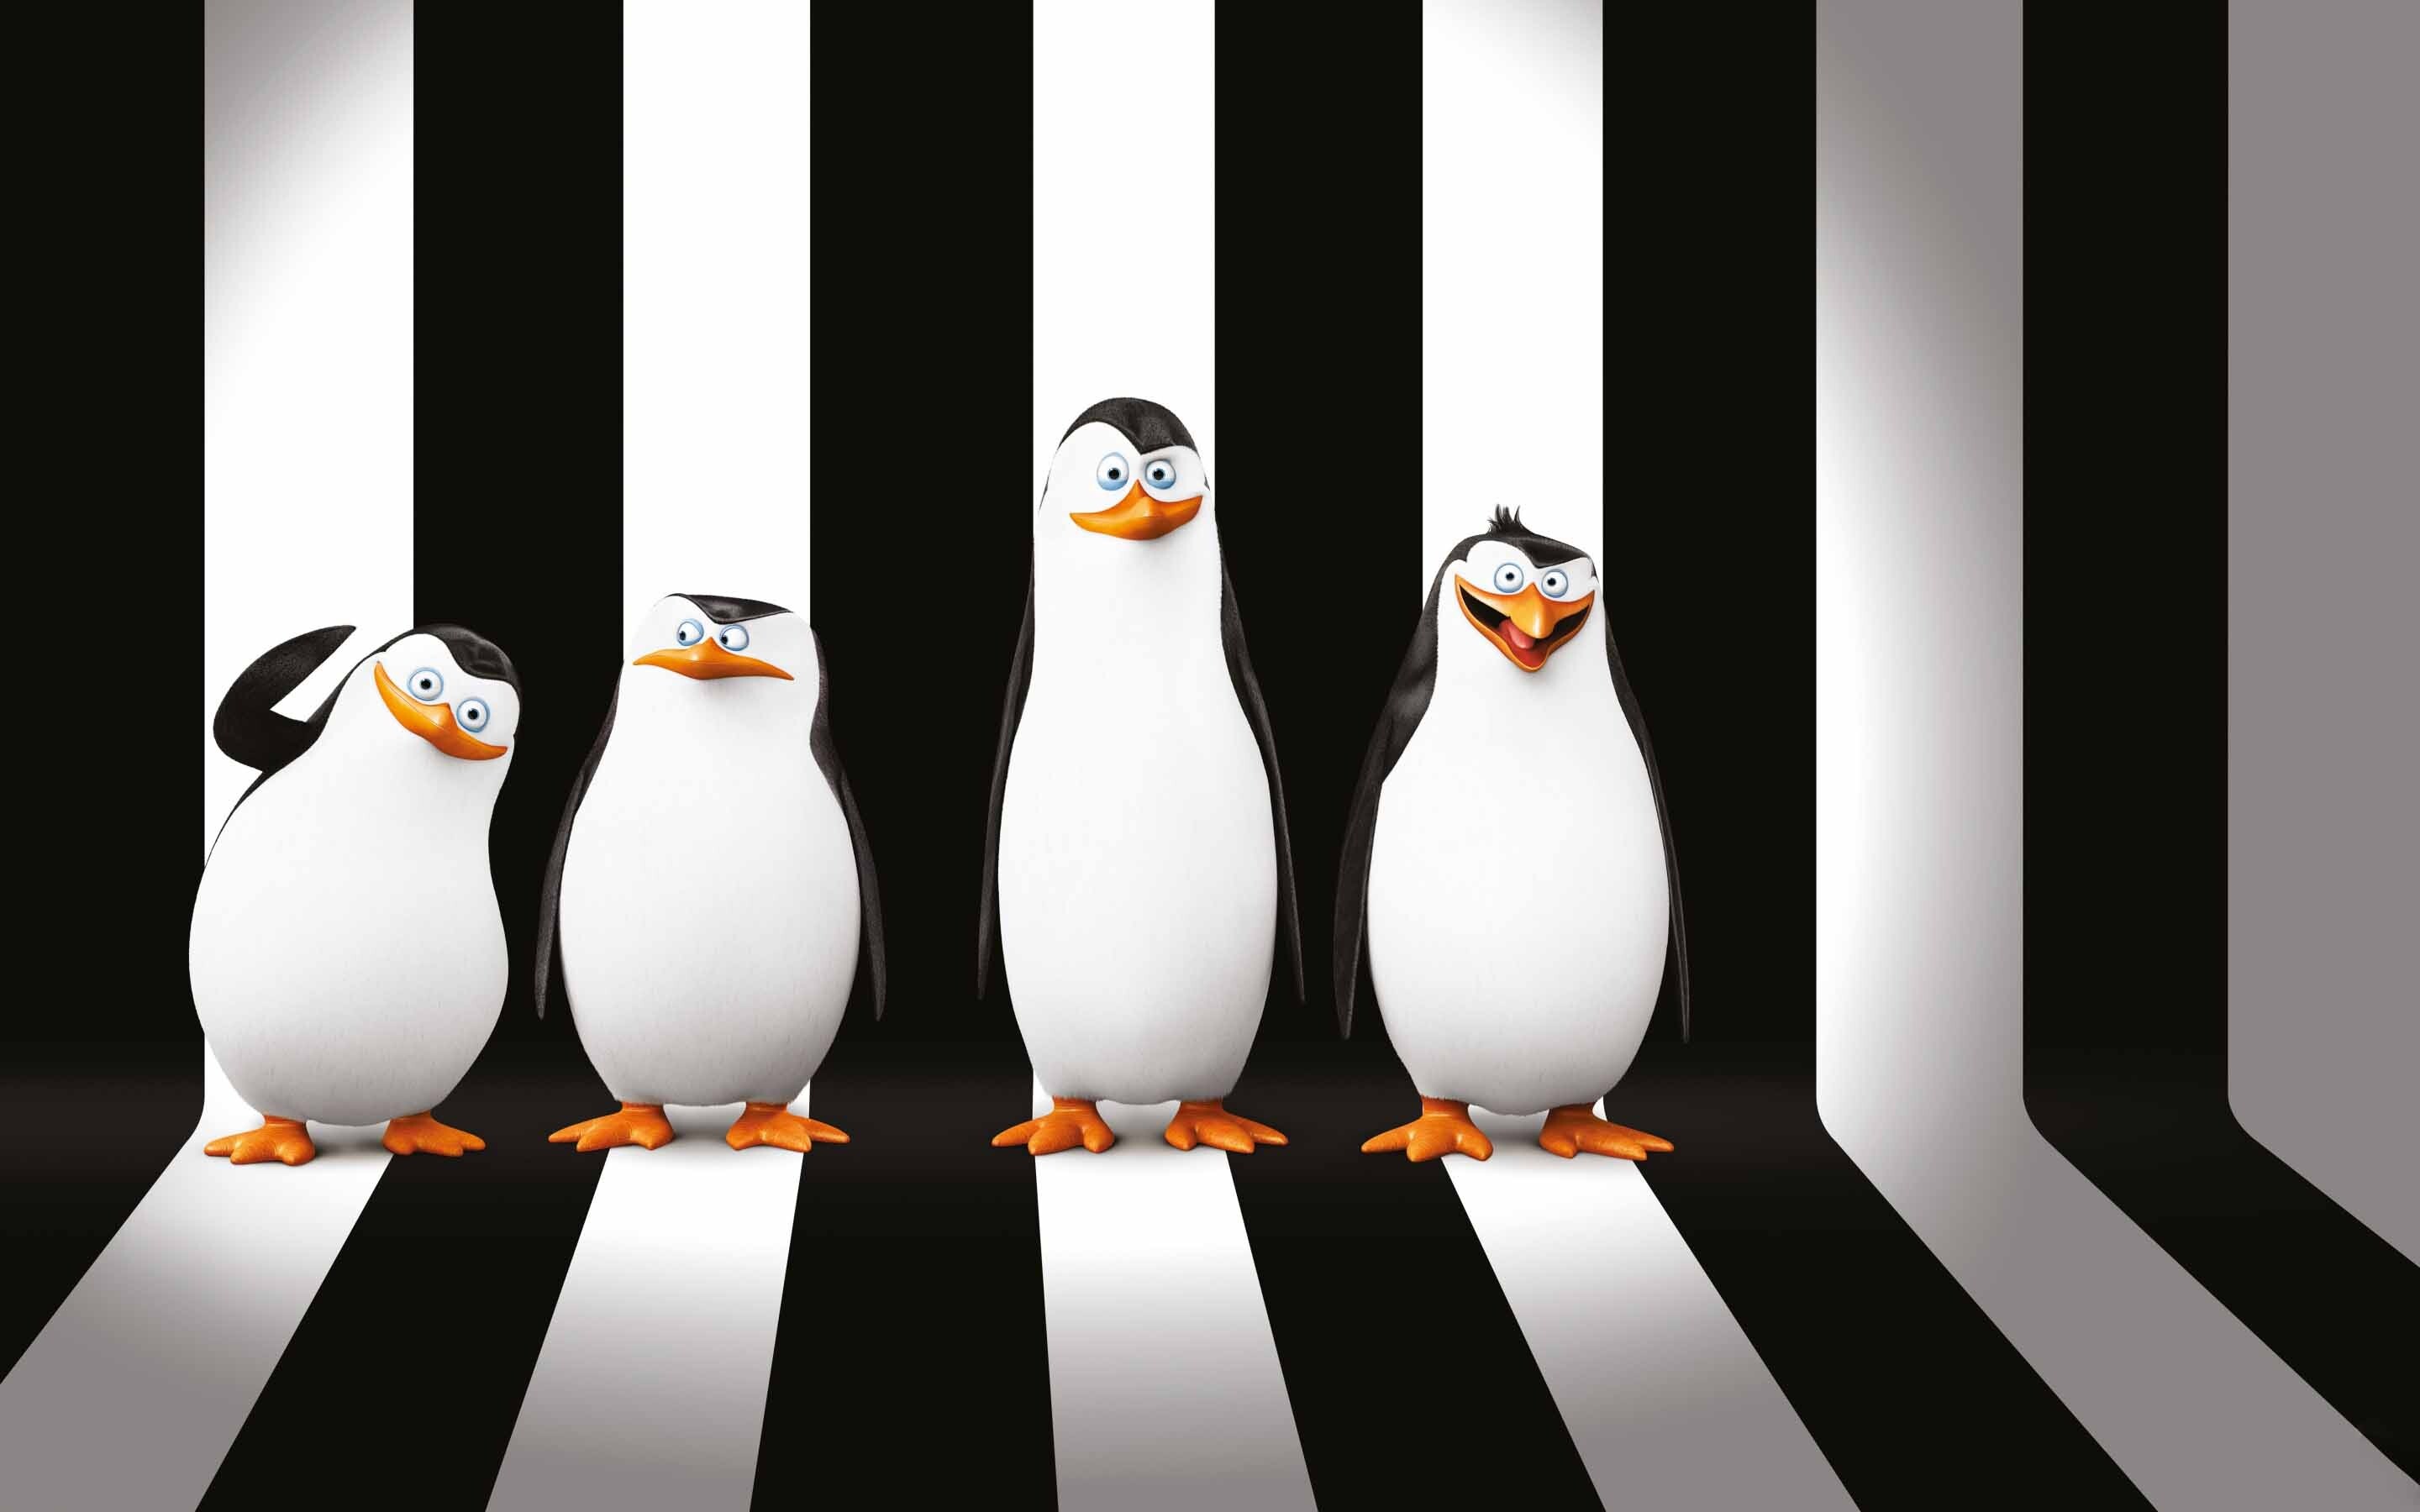 Madagascar (Movie): Penguins Of Madagascar, A 2014 American computer-animated spy action comedy film. 2880x1800 HD Wallpaper.